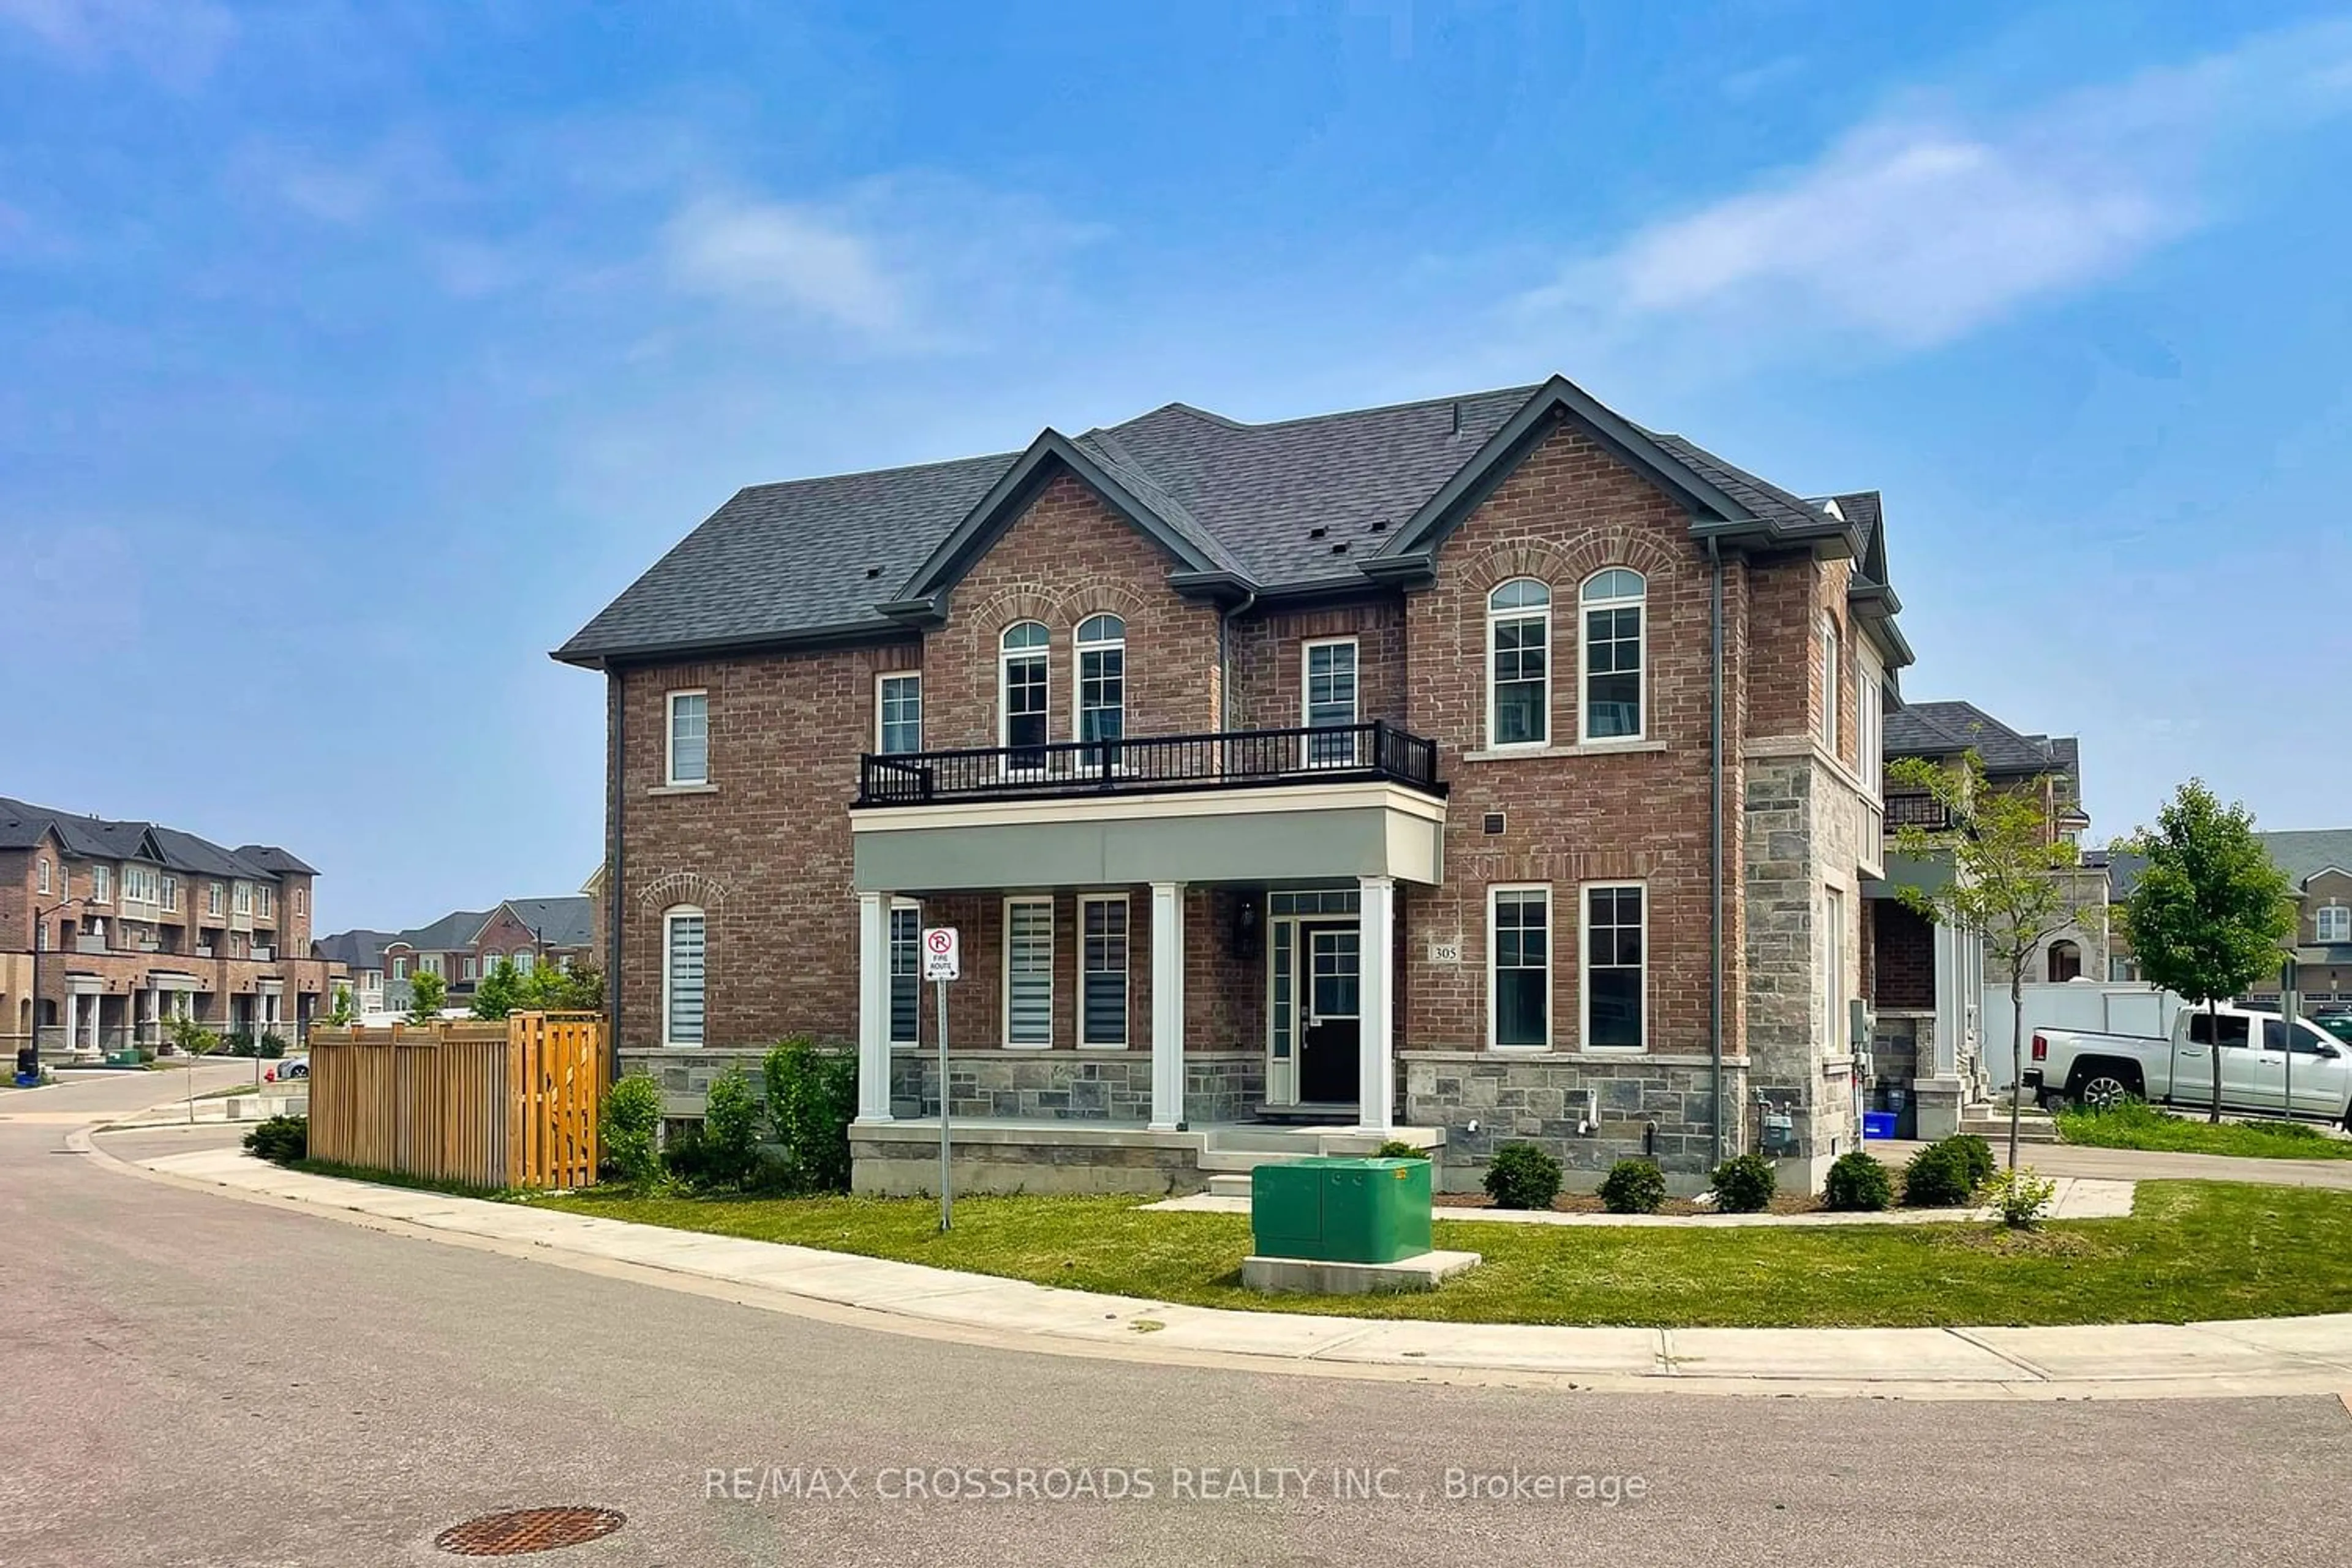 Home with brick exterior material for 305 Clay stones St, Newmarket Ontario L3X 0M1